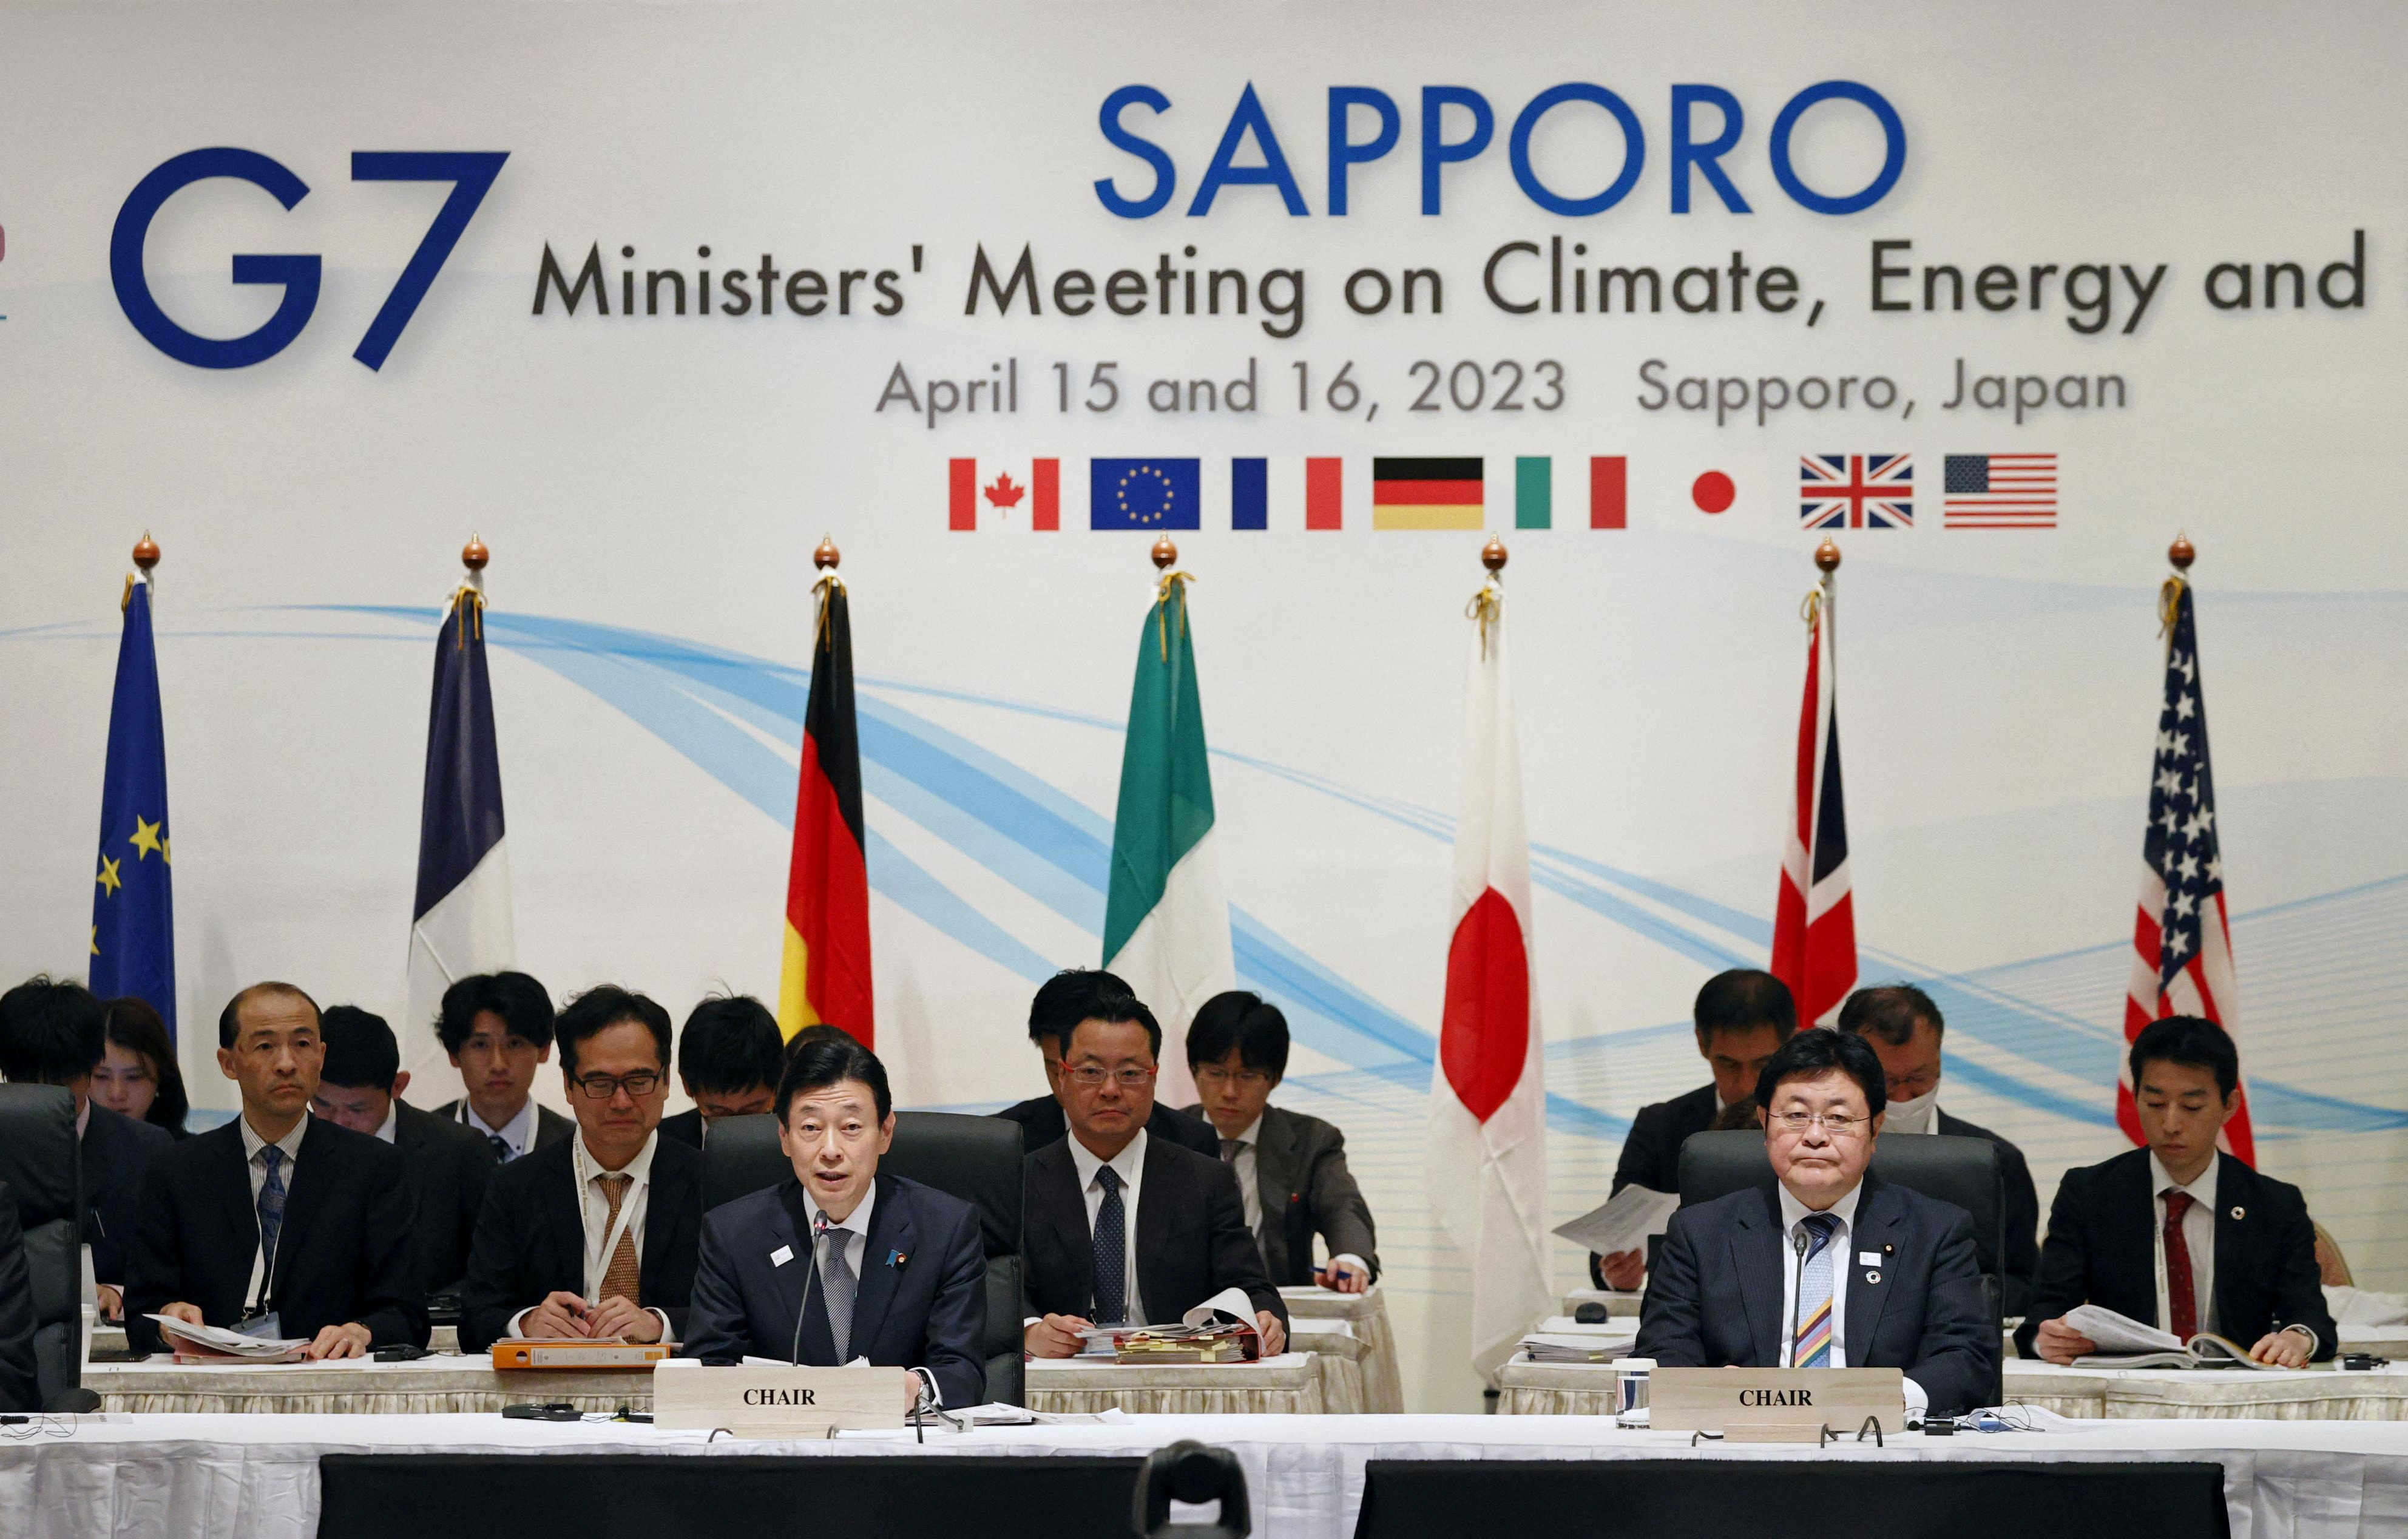 Delegates attend the opening session of G7 Ministers’ Meeting on Climate, Energy and Environment in Sapporo, Japan